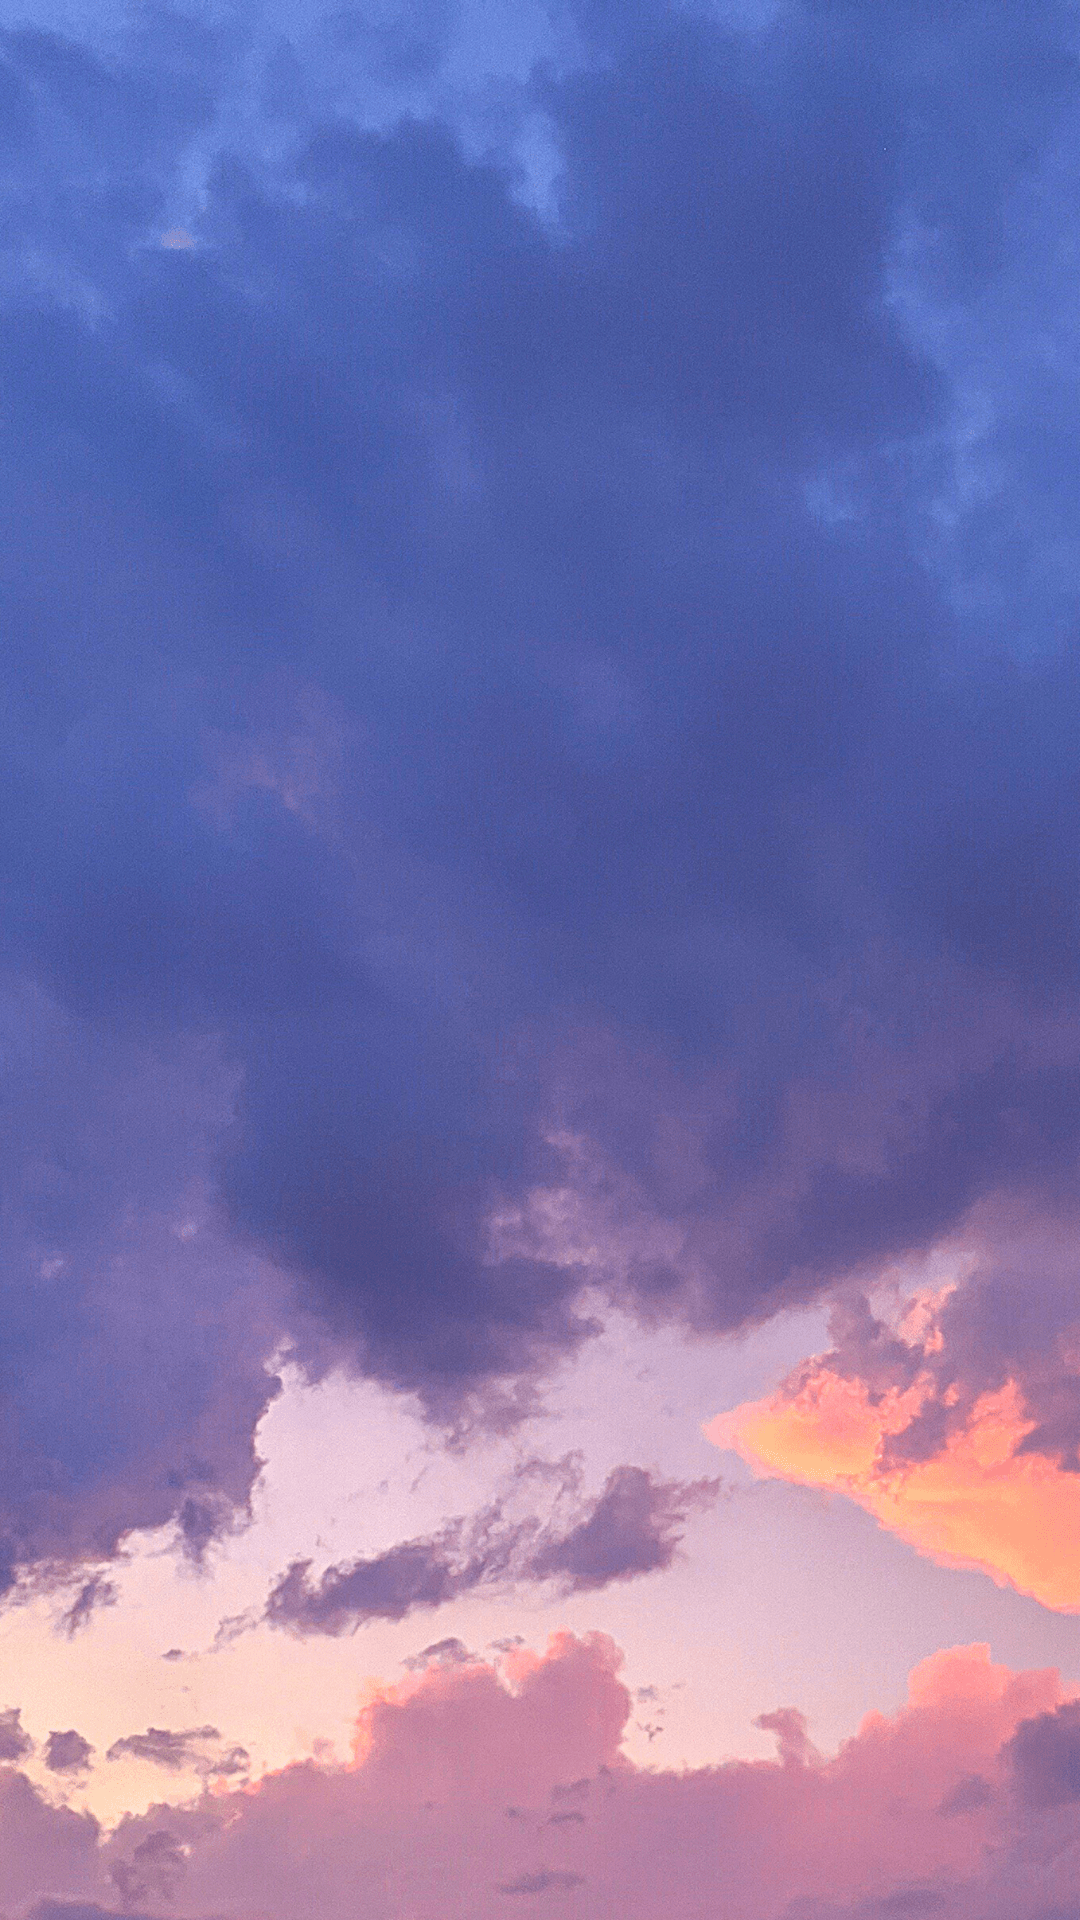 A sky during sunset with a mix of blue, purple, and orange clouds. - Sunset